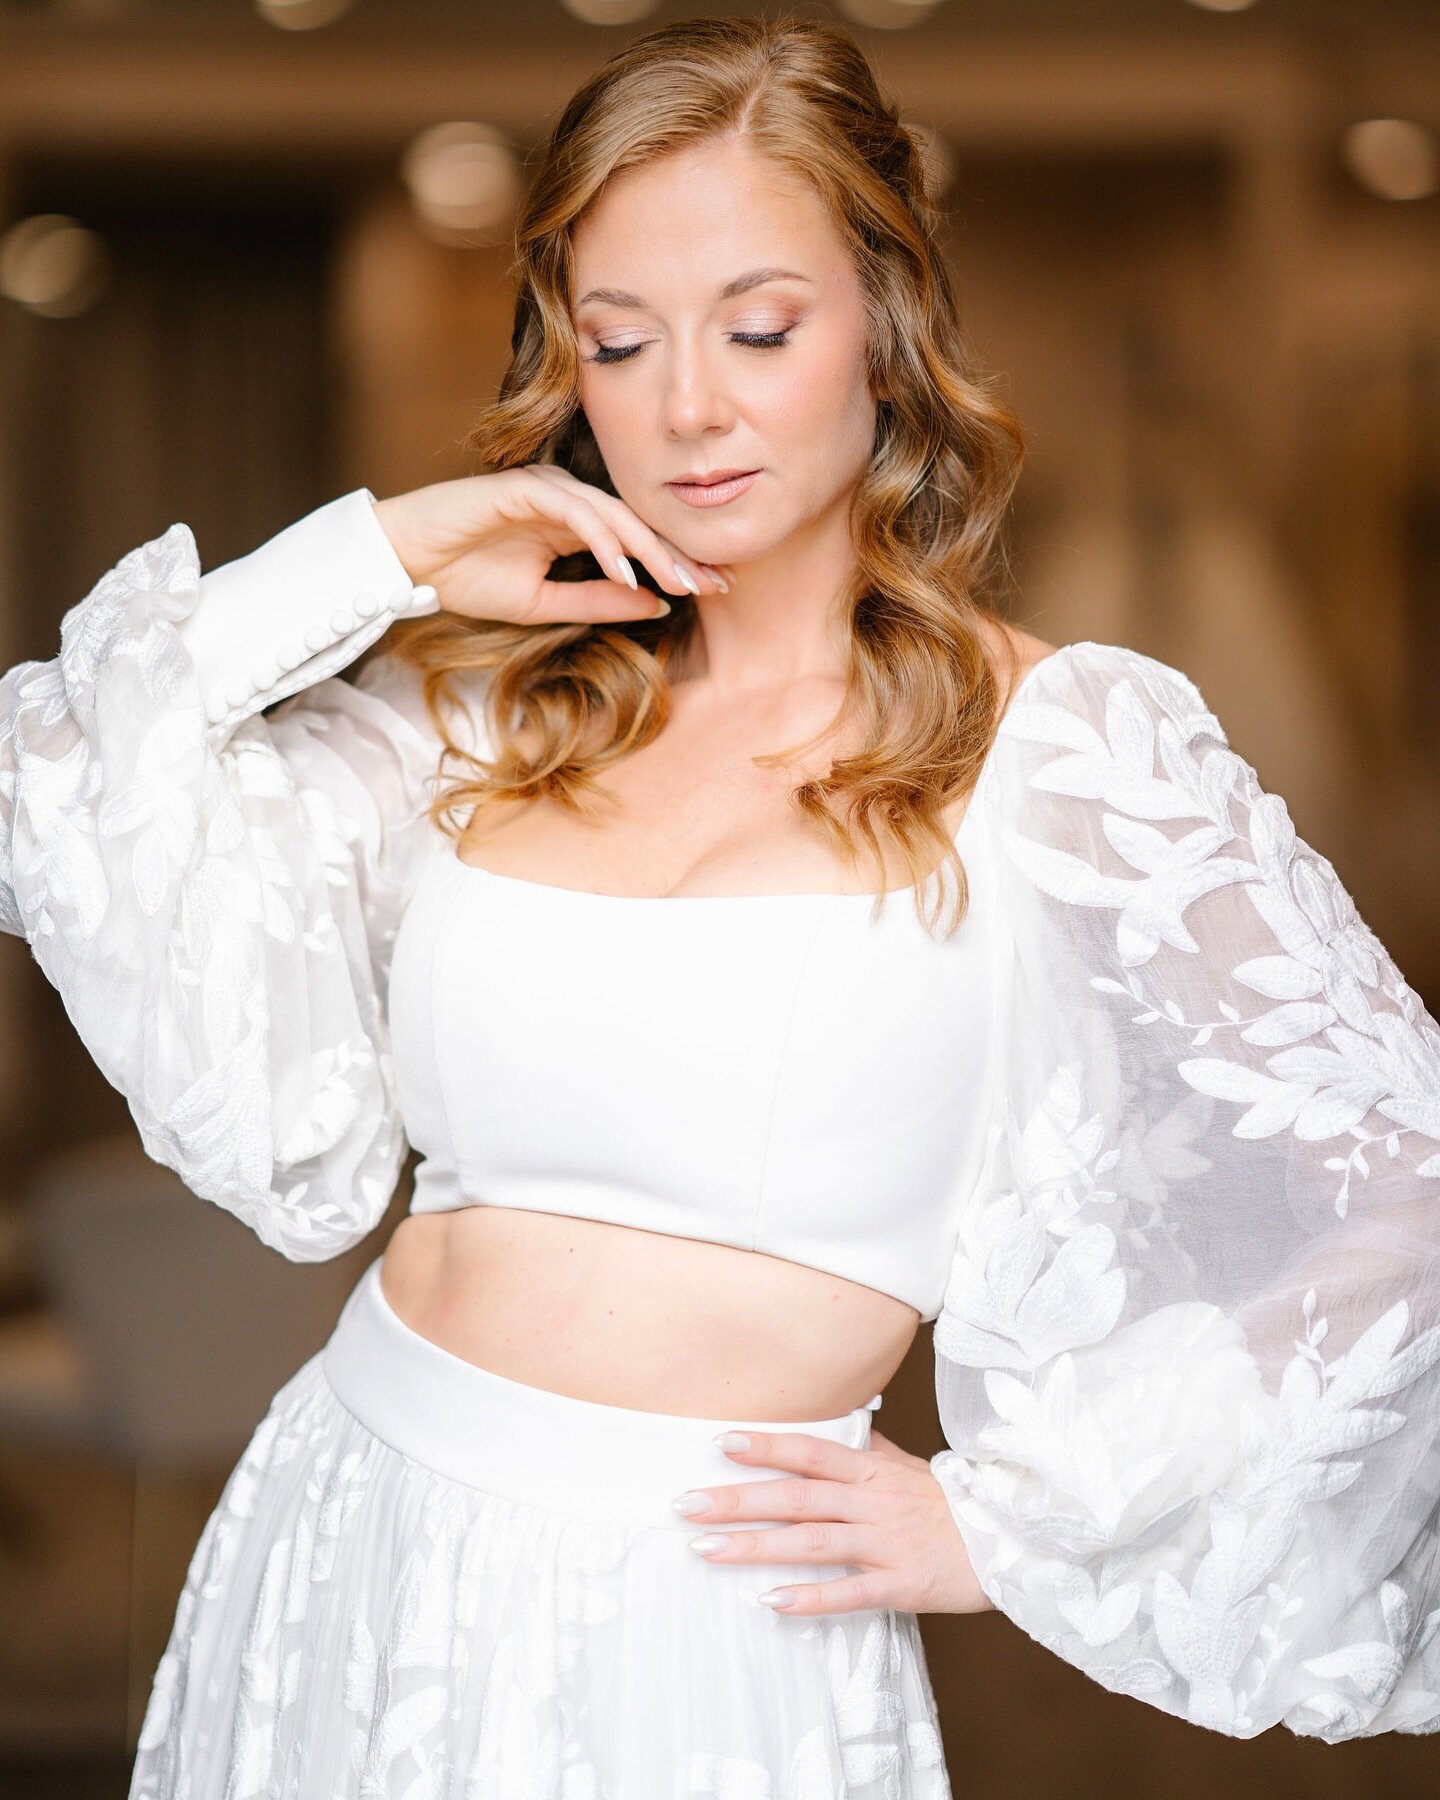 At LYS Brides we want you to feel like an elevated version of yourself. 

Makeup LYS Artist - Victoria @lysbrides 
Hair @styledbymarena___ 

Bridal shop/gowns @pebblesbridal @allwhowander 

Bridal gown , bridal shop, wedding dress shop, pebbles brida